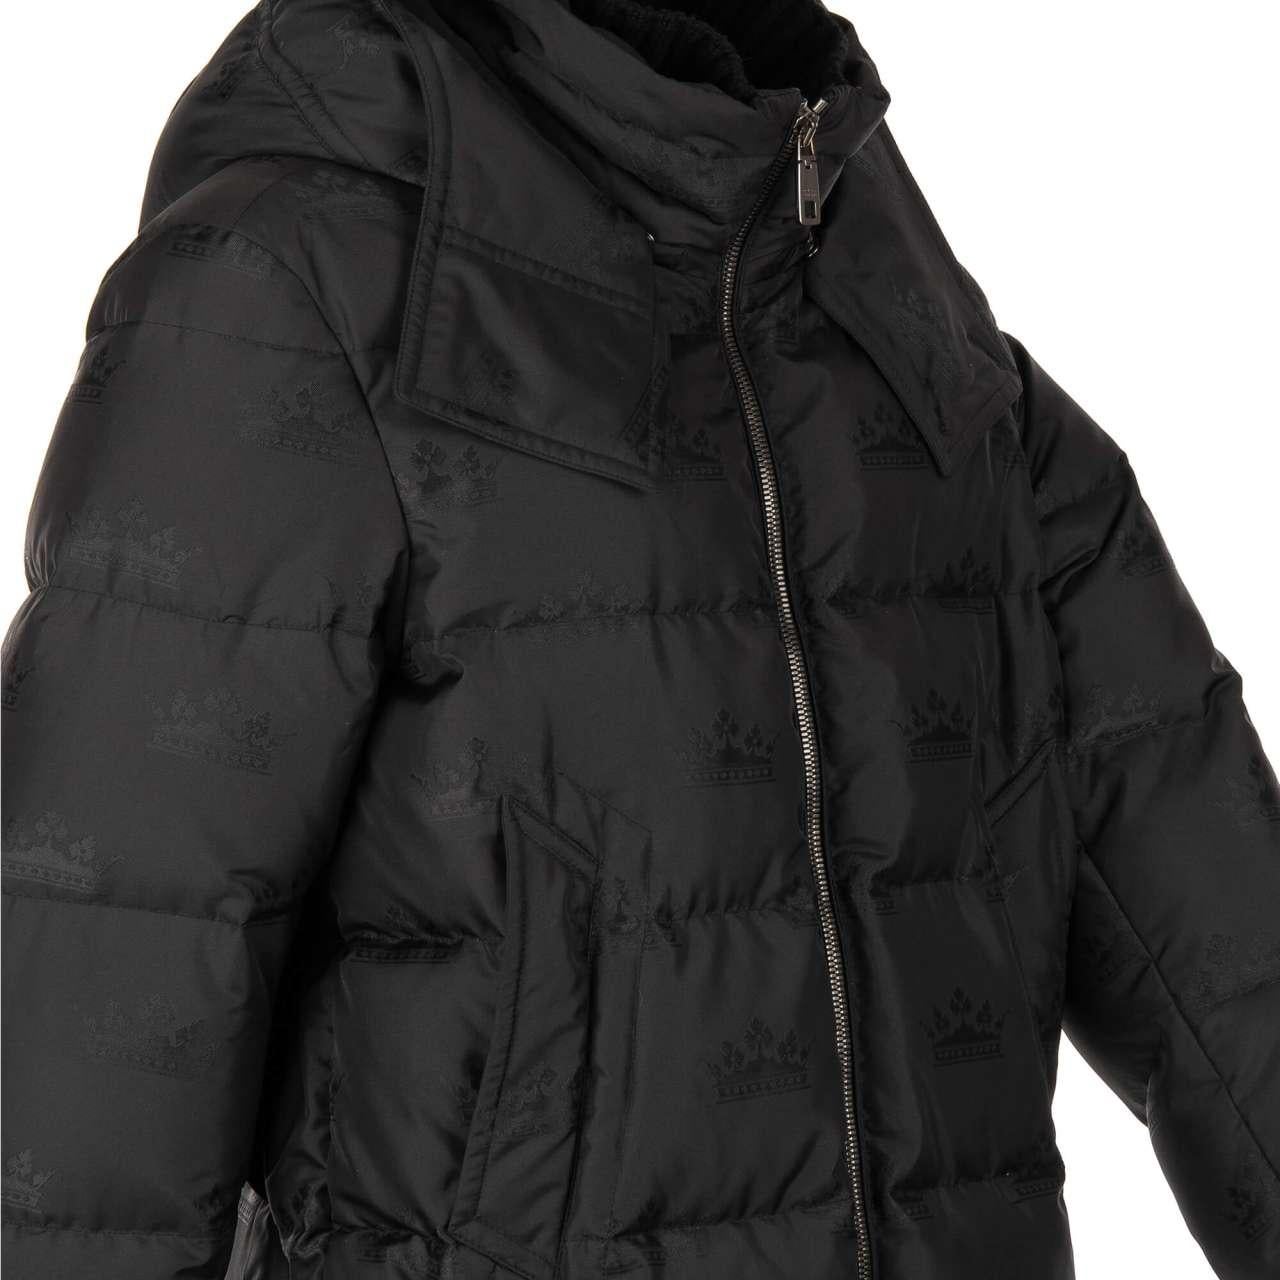 D&G Crowns Textured Hooded Down Jacket with Knit Details Black 50 M-L For Sale 1